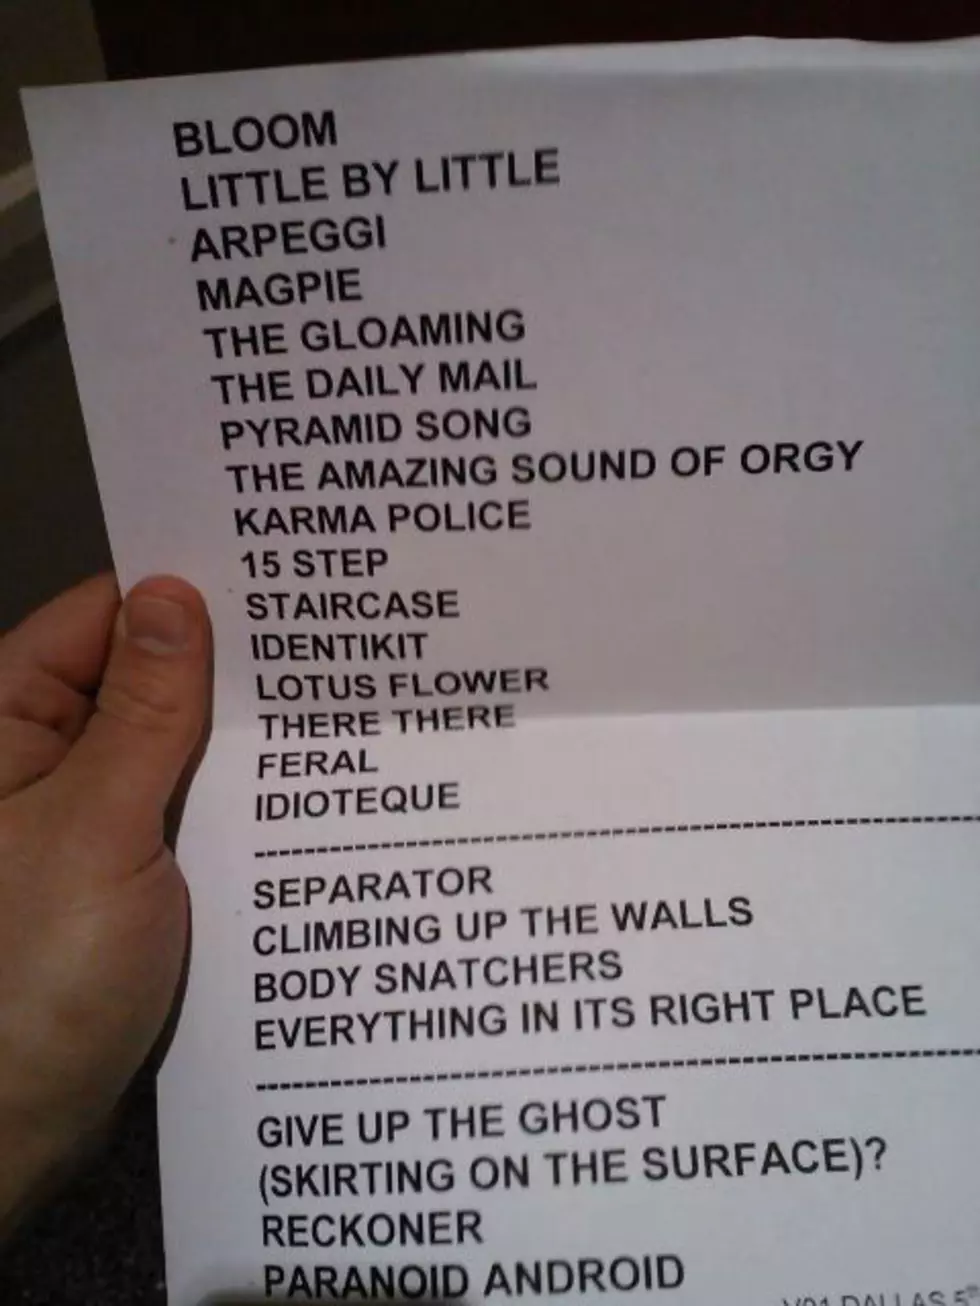 Radiohead played American Airlines Center in Dallas (setlist), announced more tour dates, play Austin TONIGHT